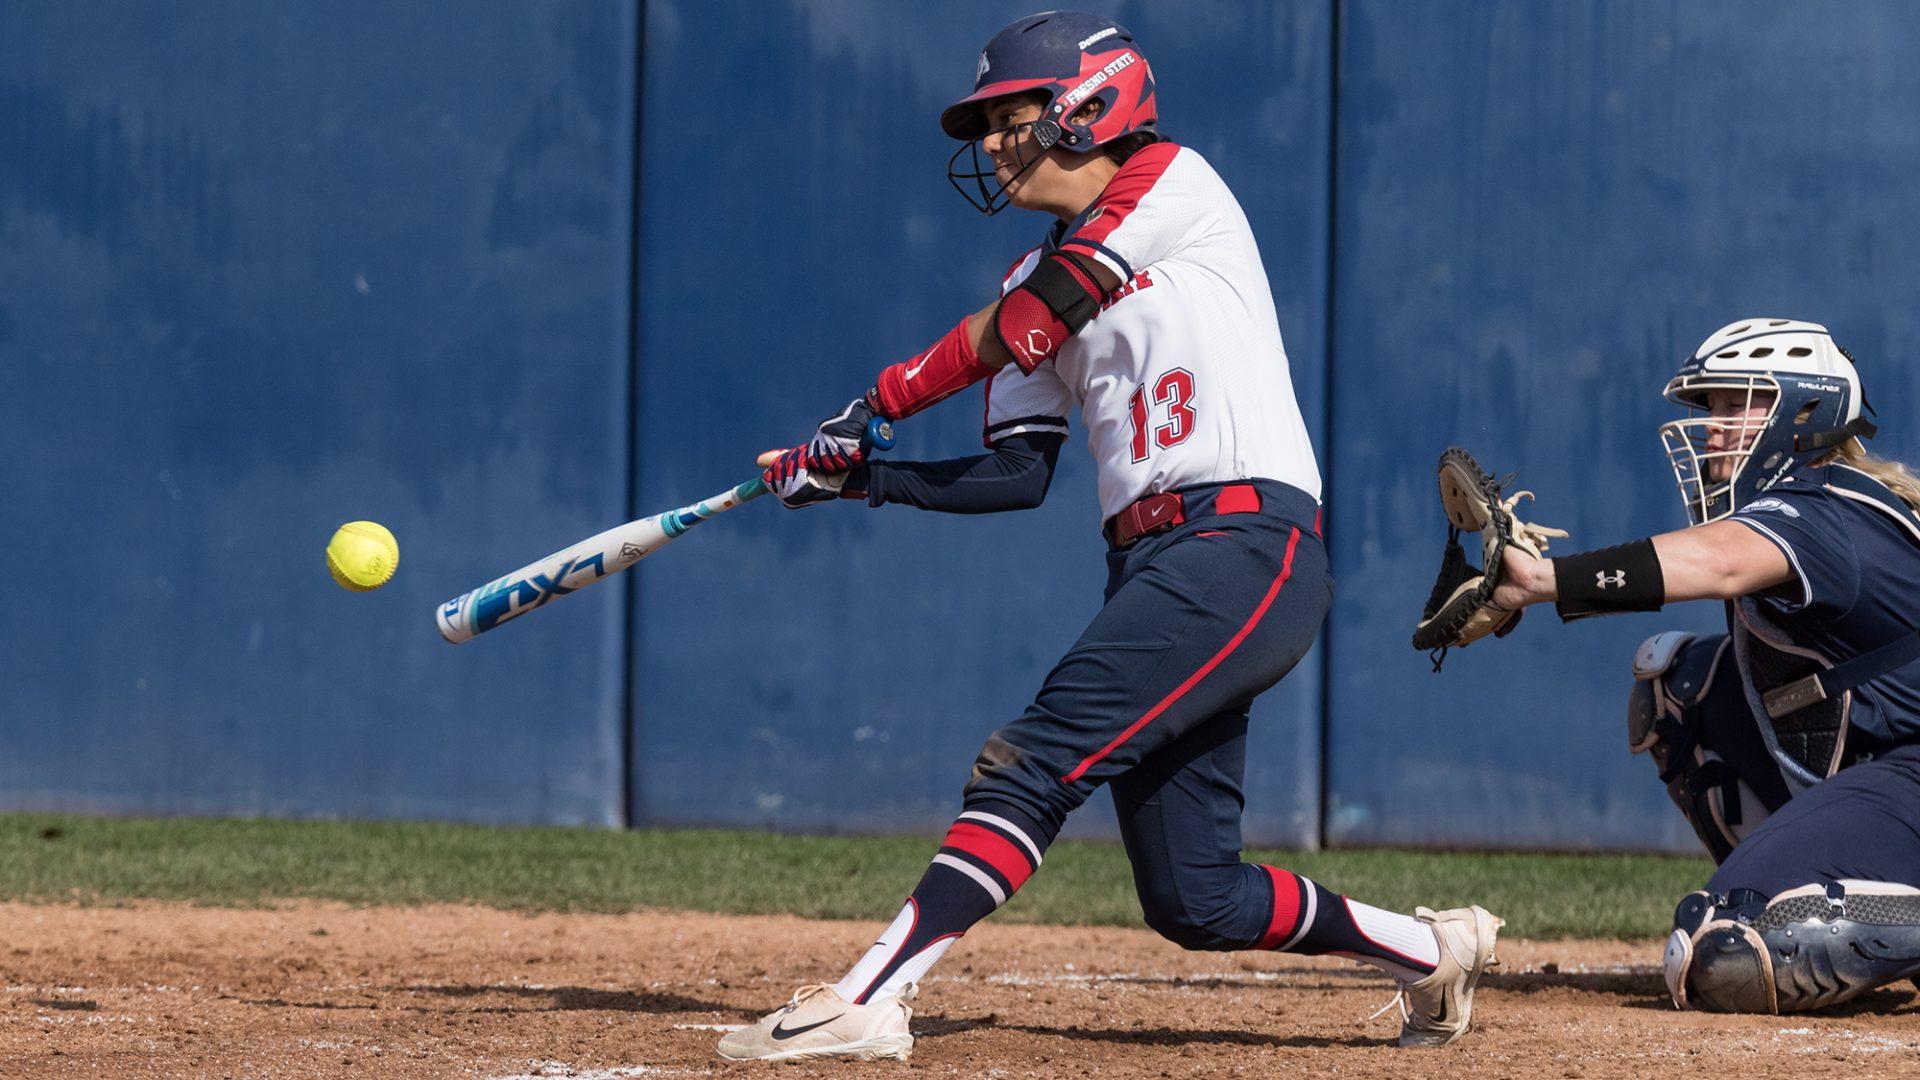 Senior+Katie+Castellon+is+leading+the+Mountain+West+Conference+in+slugging+percentage%2C+hitting+.442+and+is+third+in+batting+average+and+on-base+percentage+this+season.+%28Fresno+State+Athletics%29+%0A